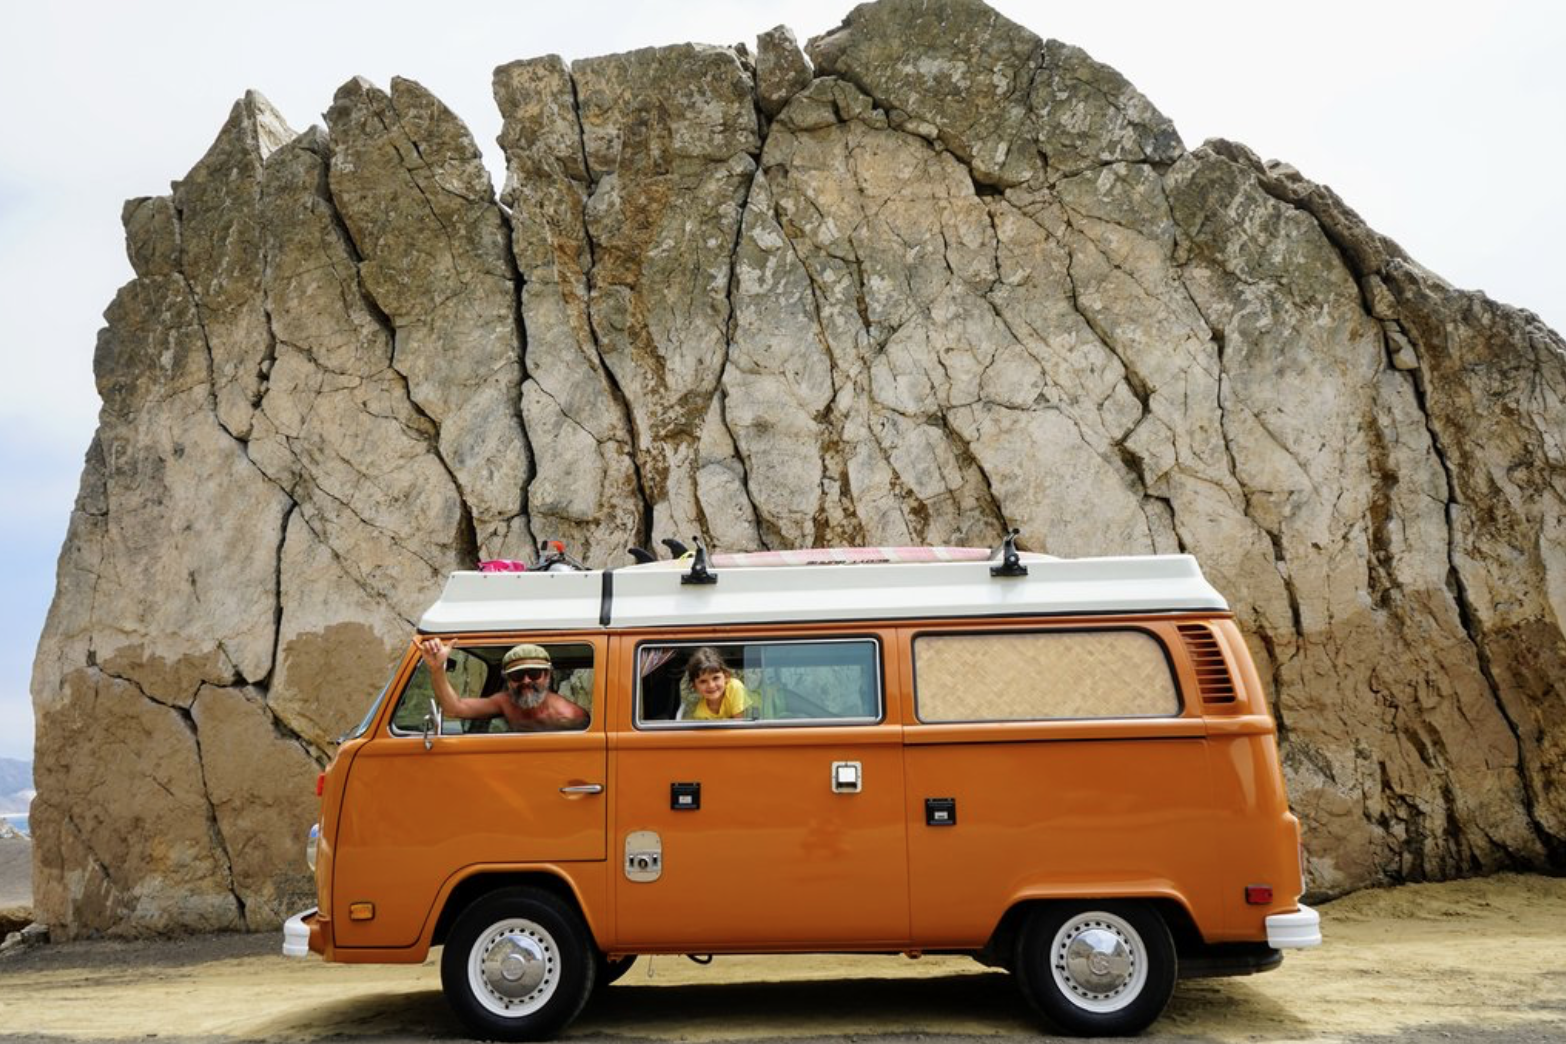 The Endless Summer of the VW Bus